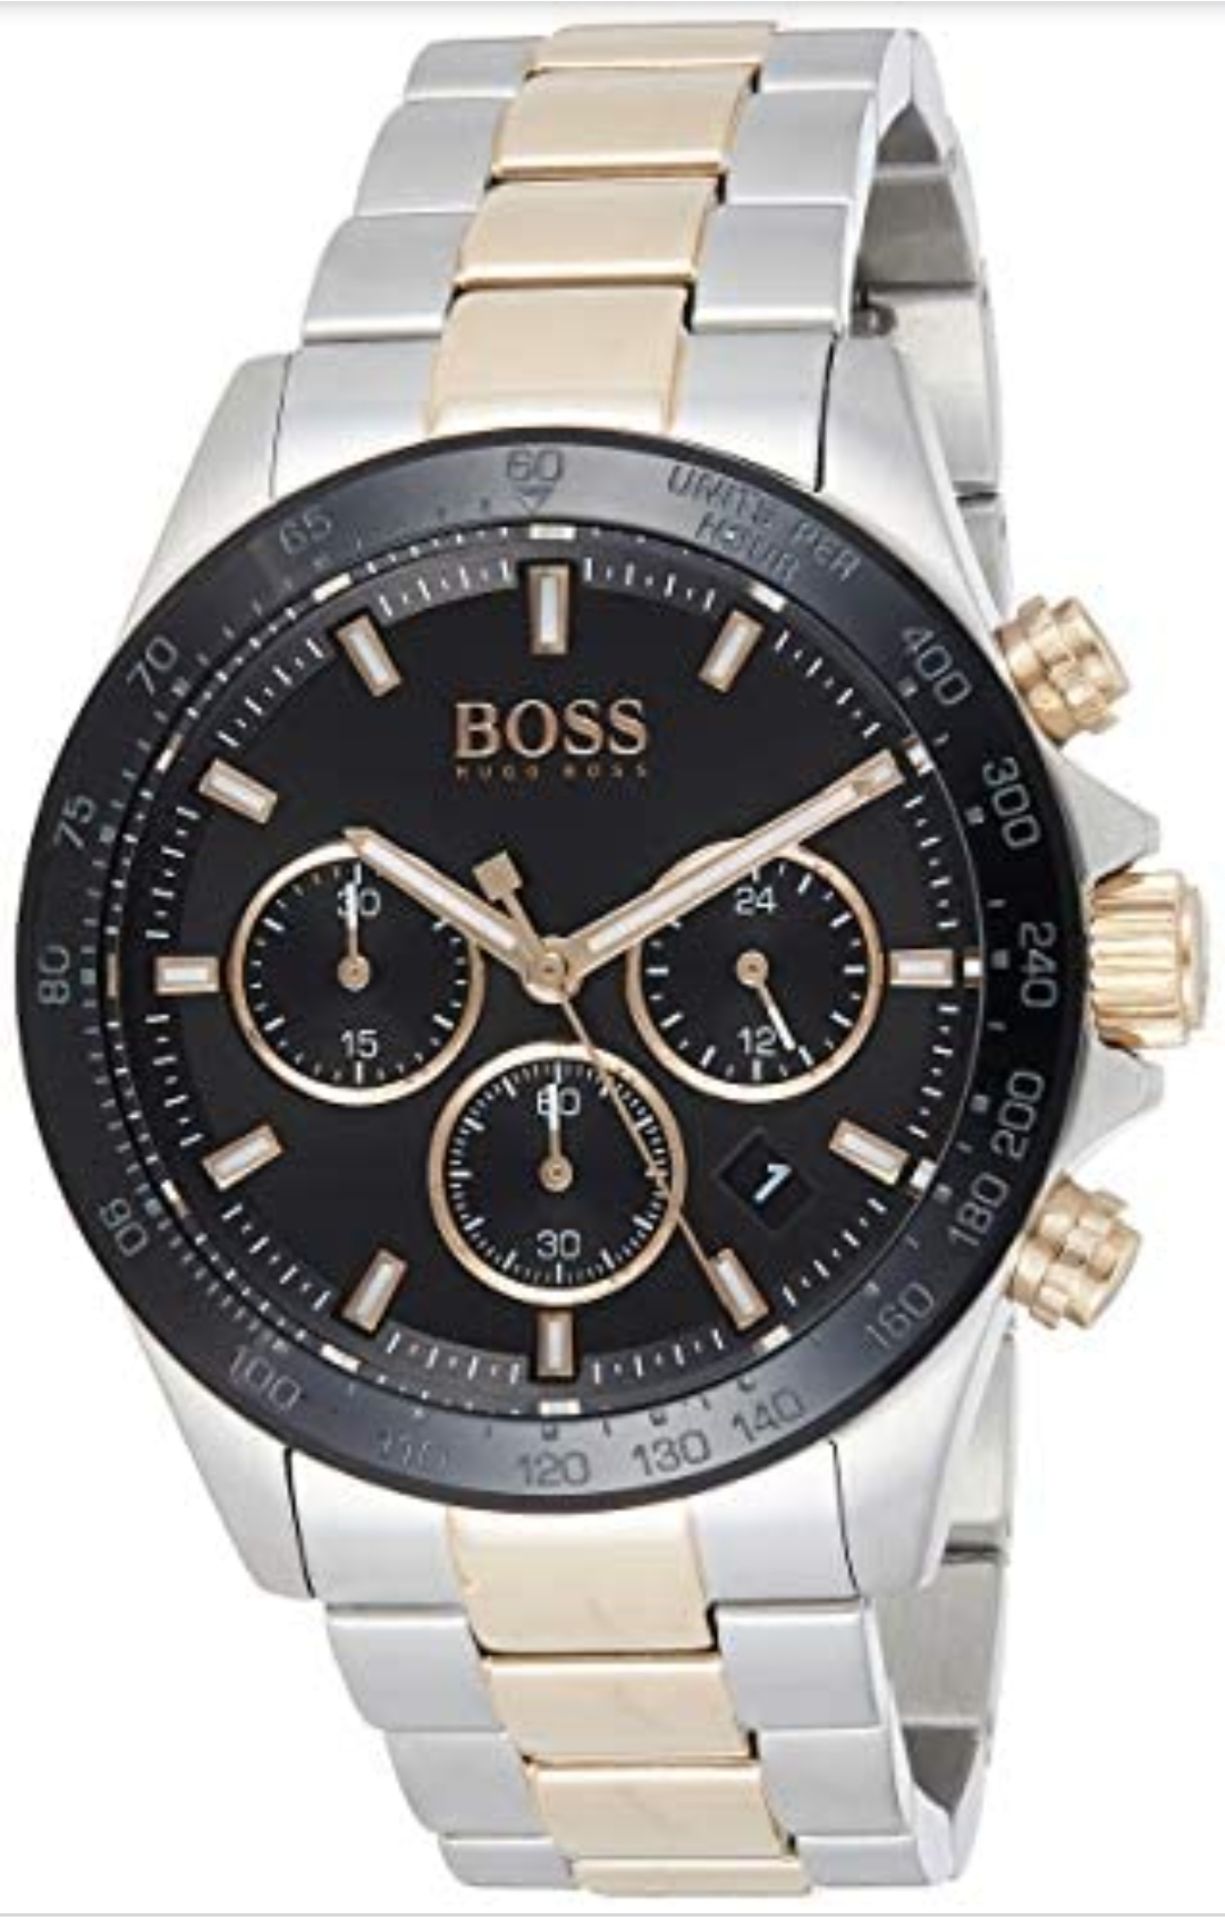 Hugo Boss 1513757 Men's Hero Sport Lux Two Tone Chronograph Watch  Model: HB 1513757.Case: Stainless - Image 5 of 6